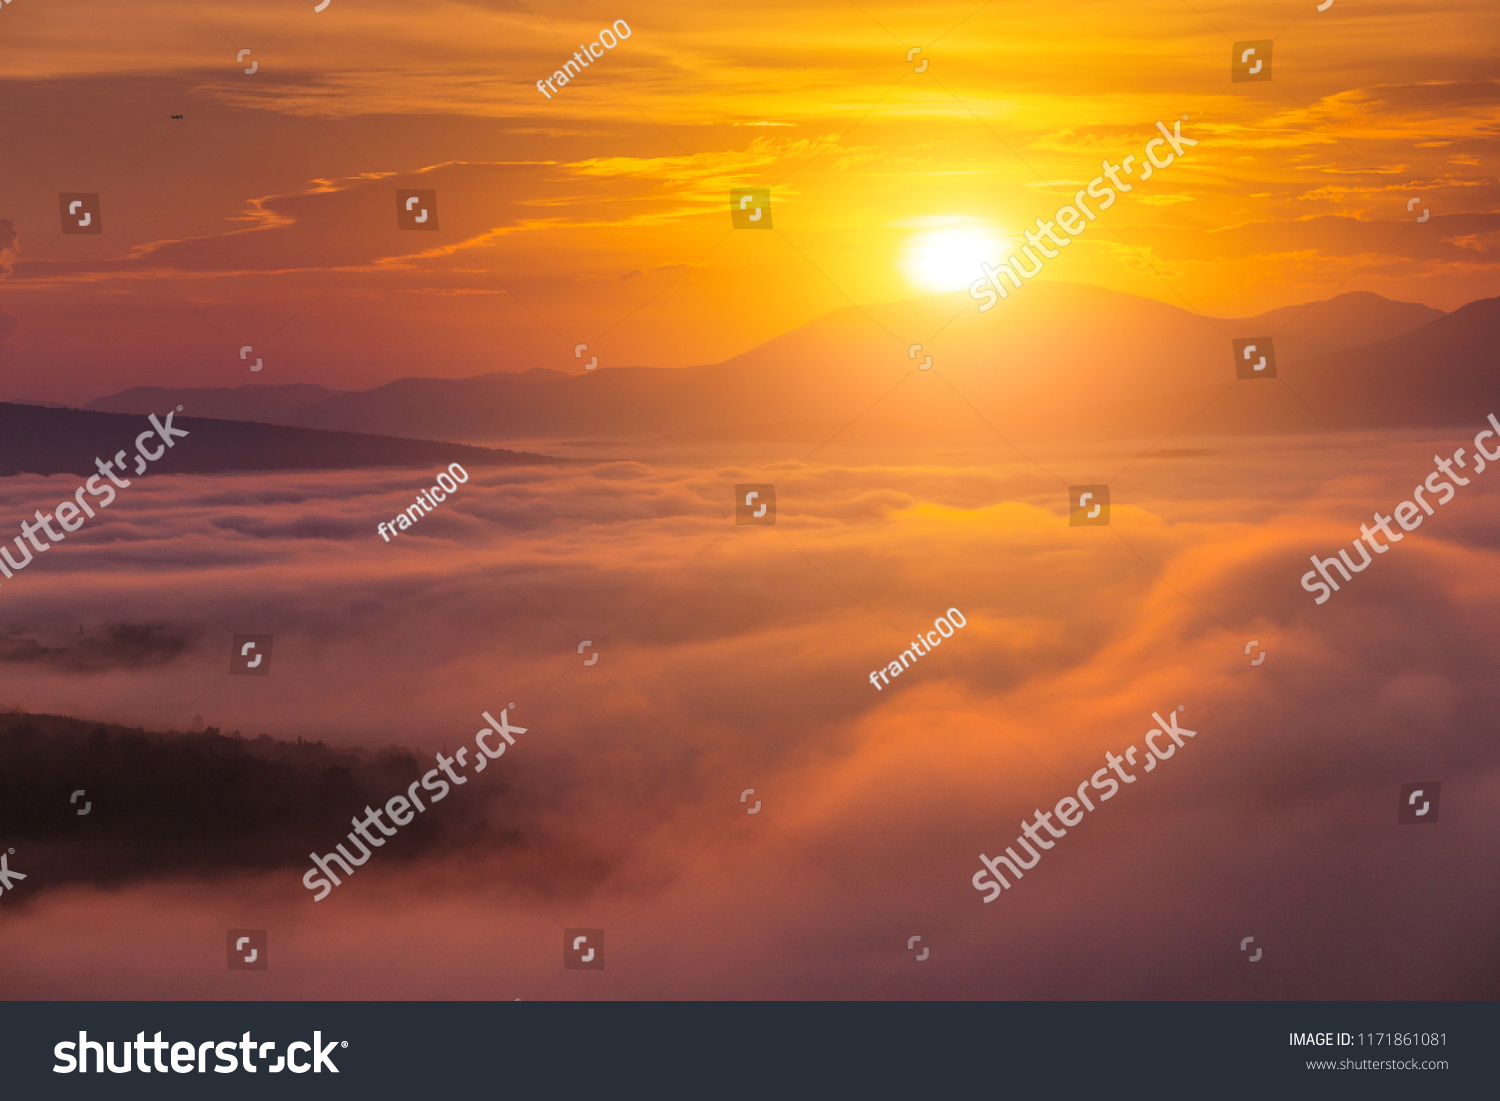 Colorful landscape in mountains with fog and sun #1171861081